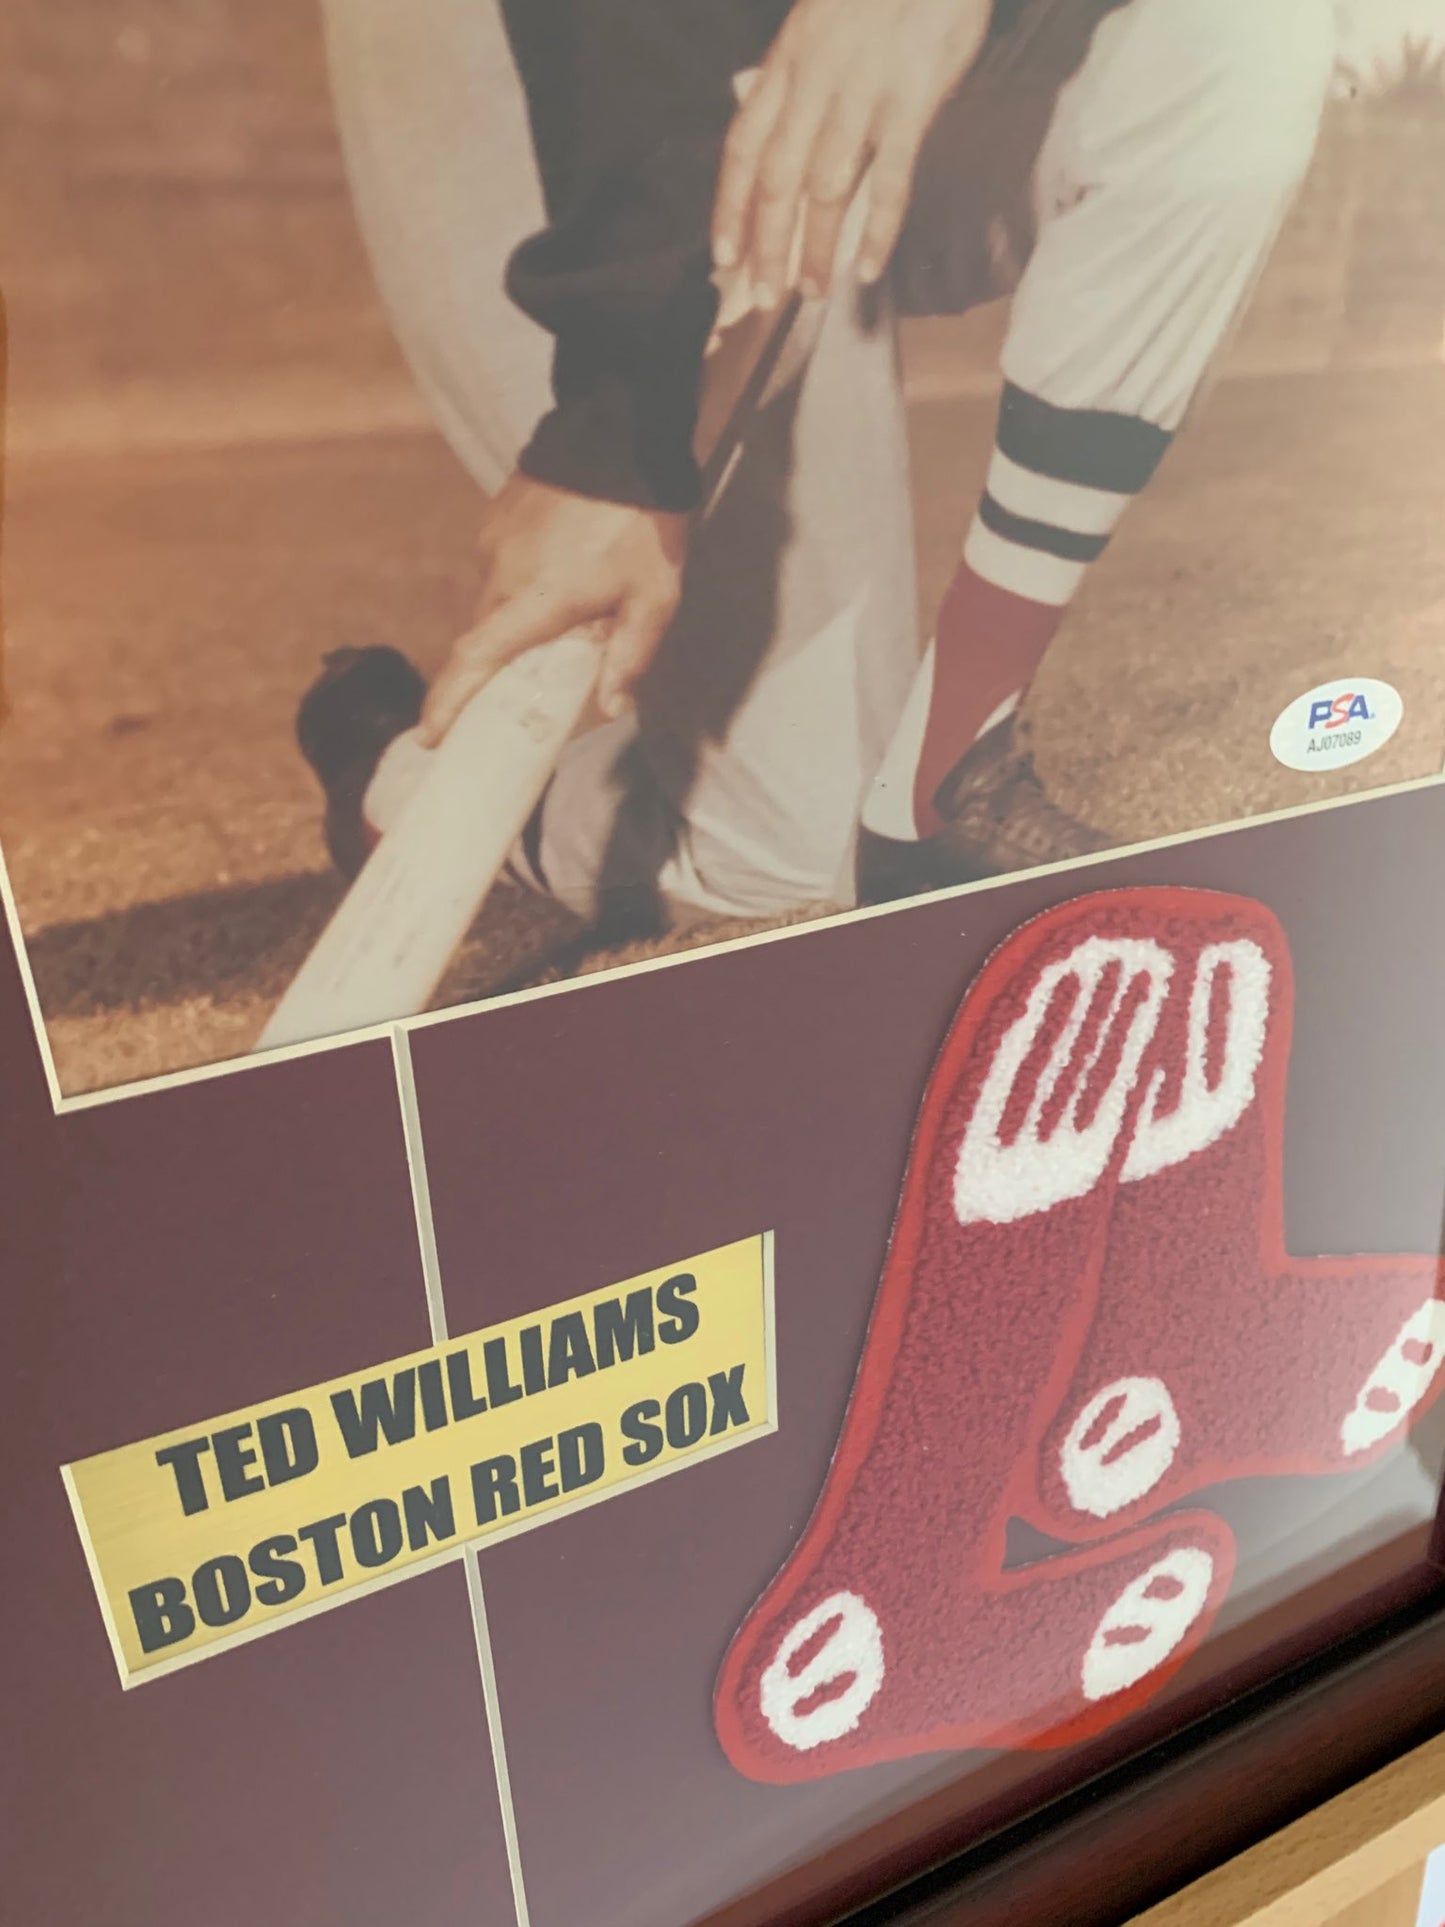 Ted Williams Boston Red Sox Signed Framed photo with Socks RARE PSA COA